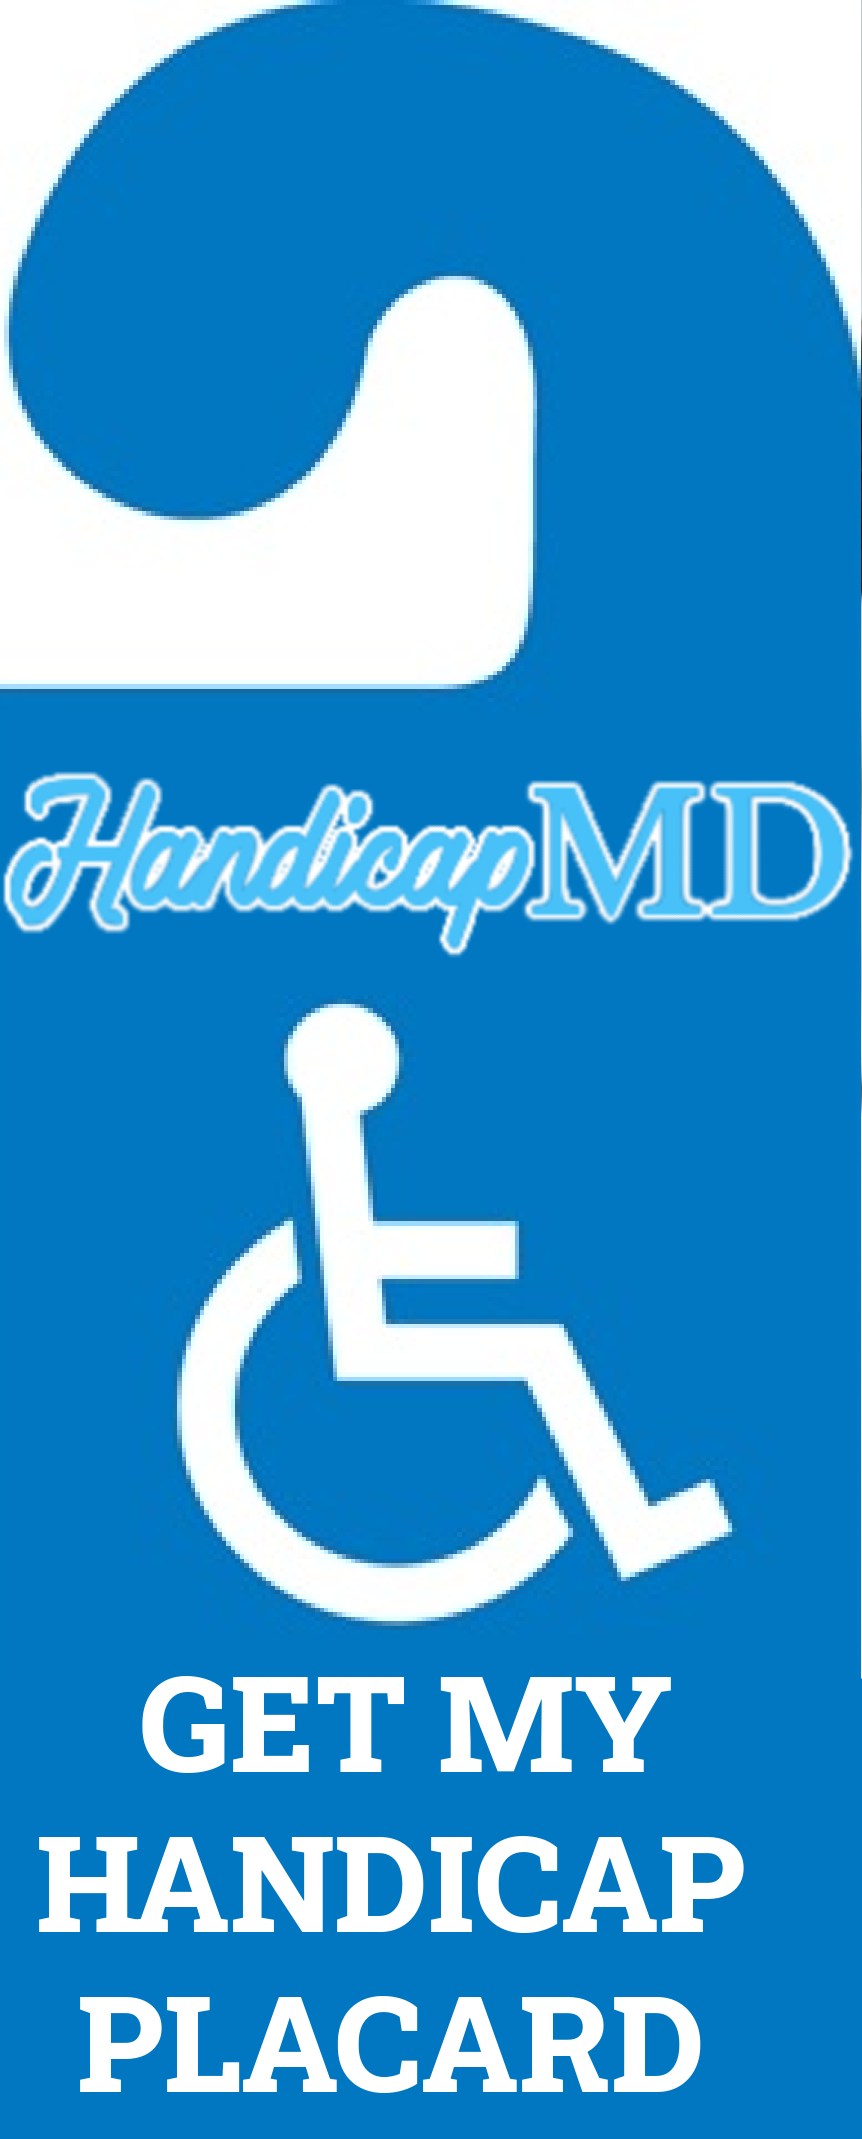 How To Get A Handicap Parking Placard Renewal in South Carolina